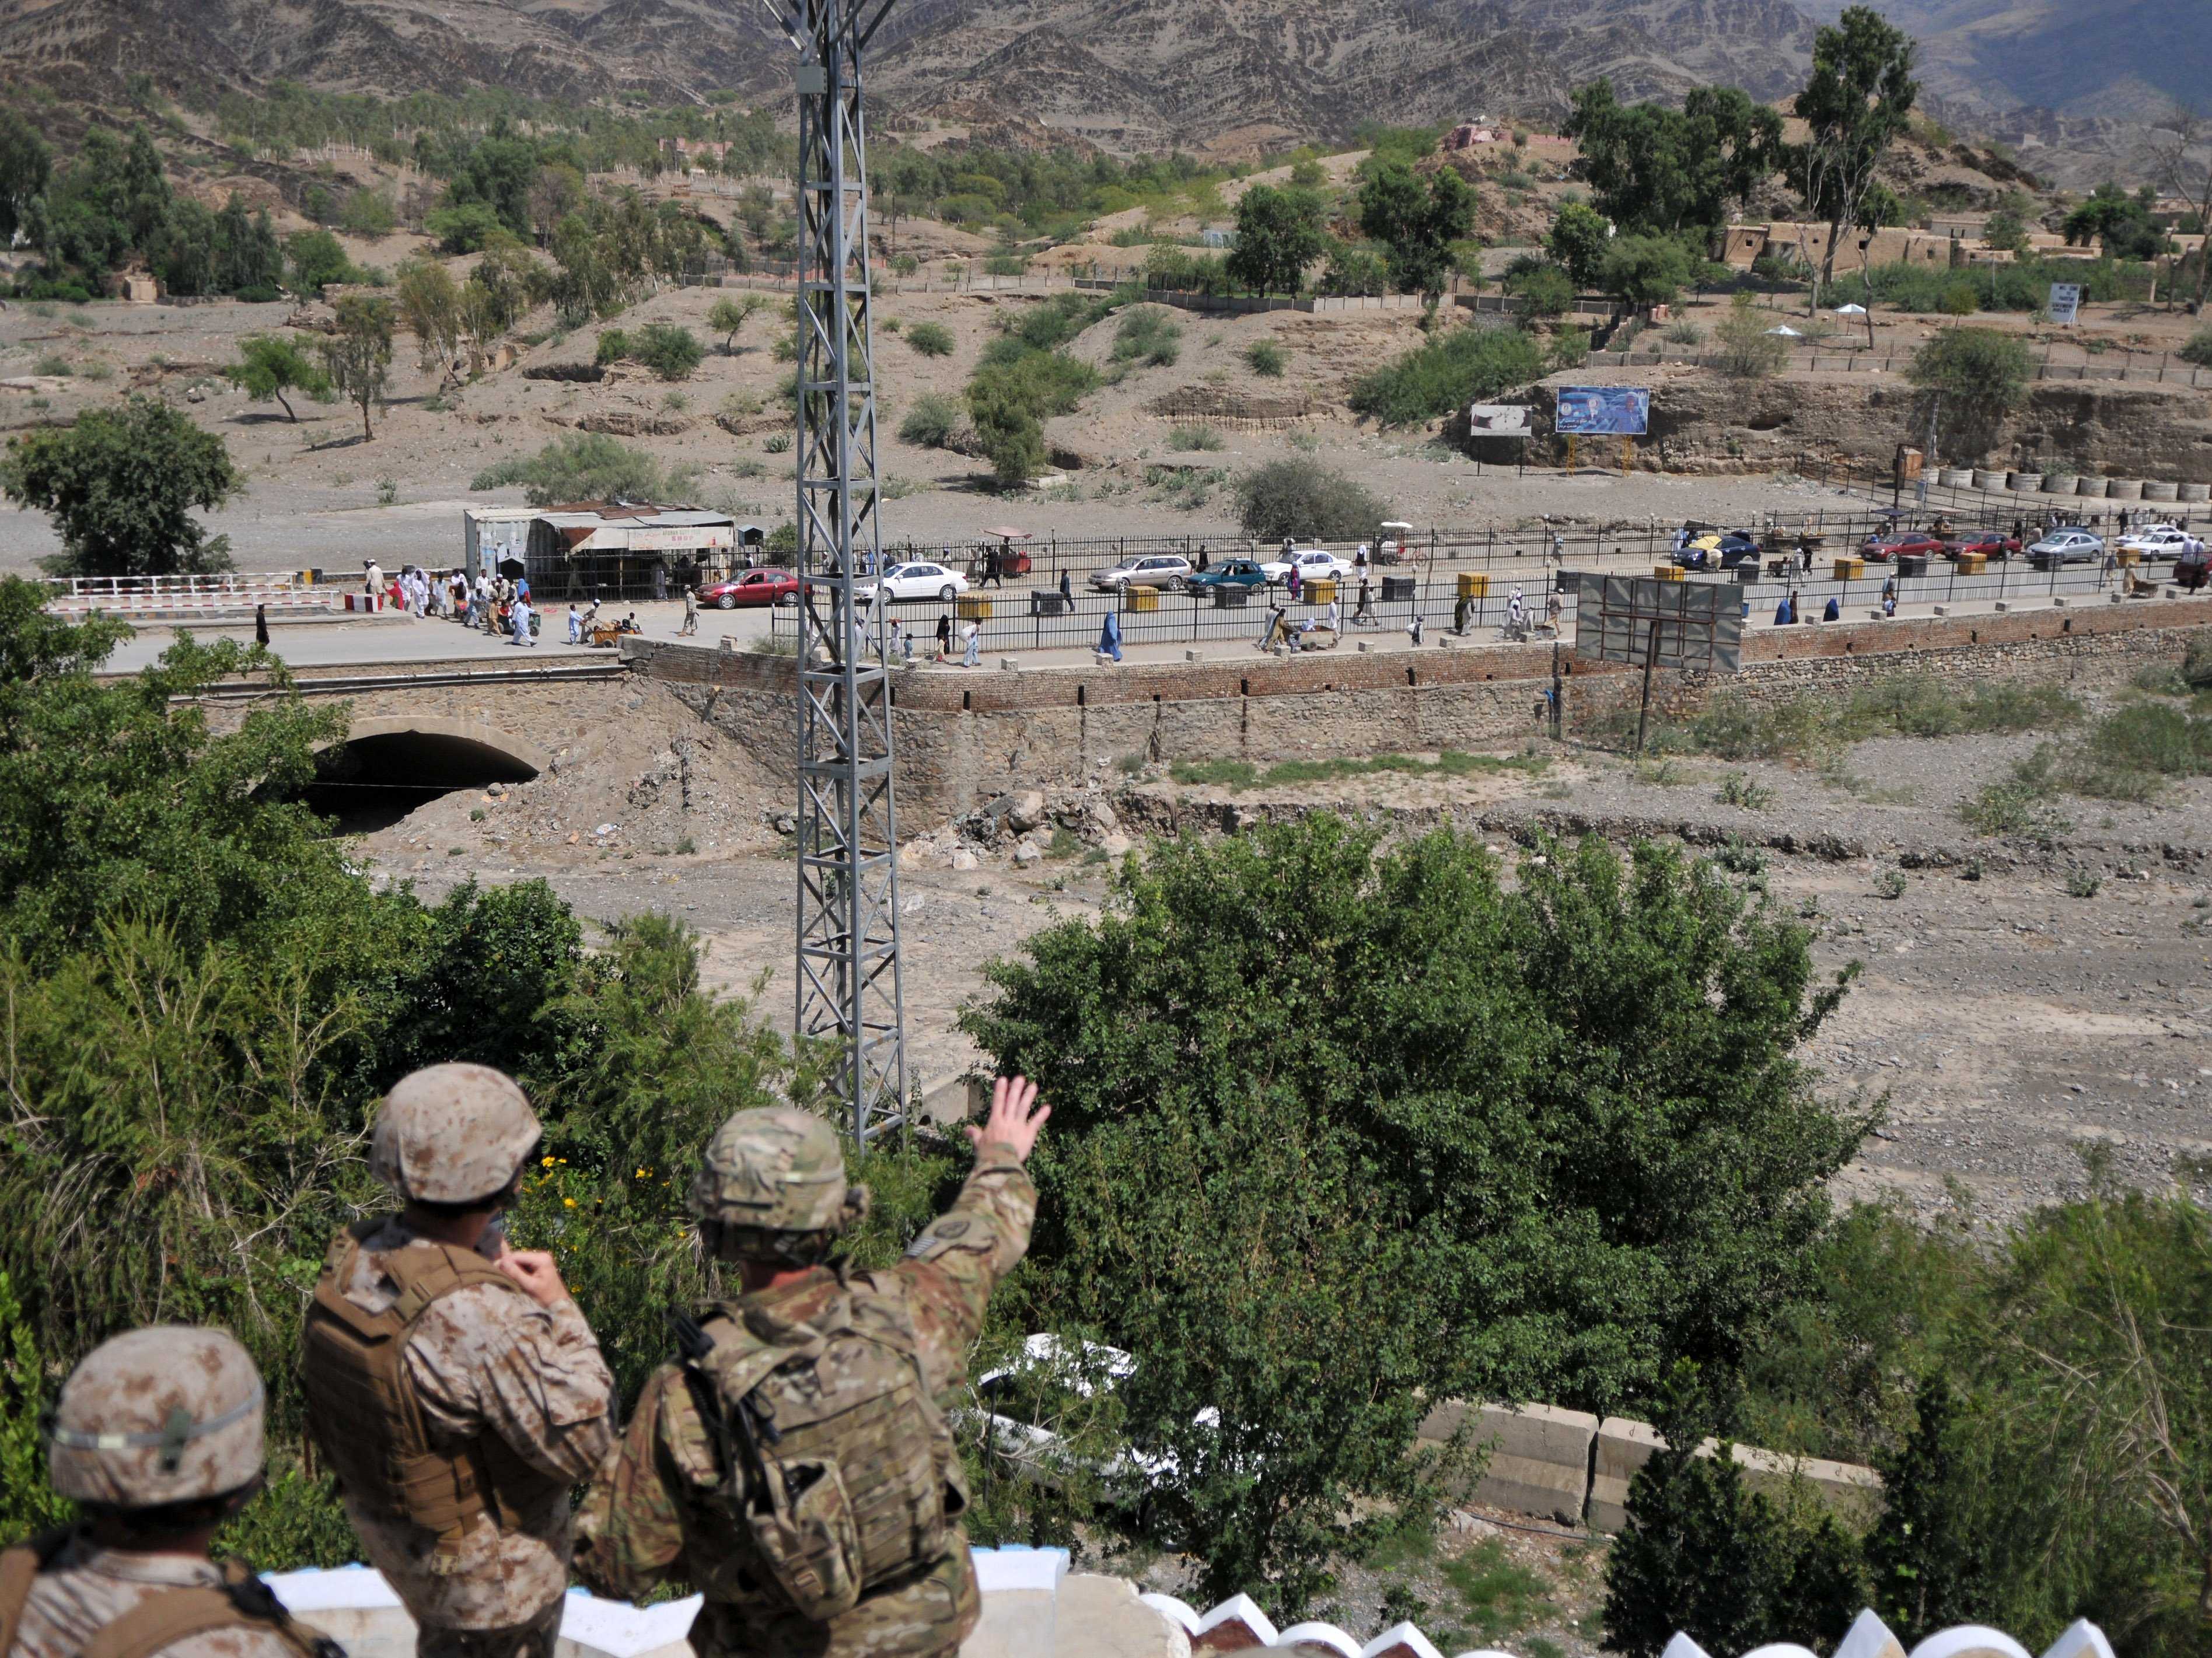 Torkham Pictured Here Is One Of The Major Border Crossings Of Afghanistan And Pakistan On The Durand Line Border  